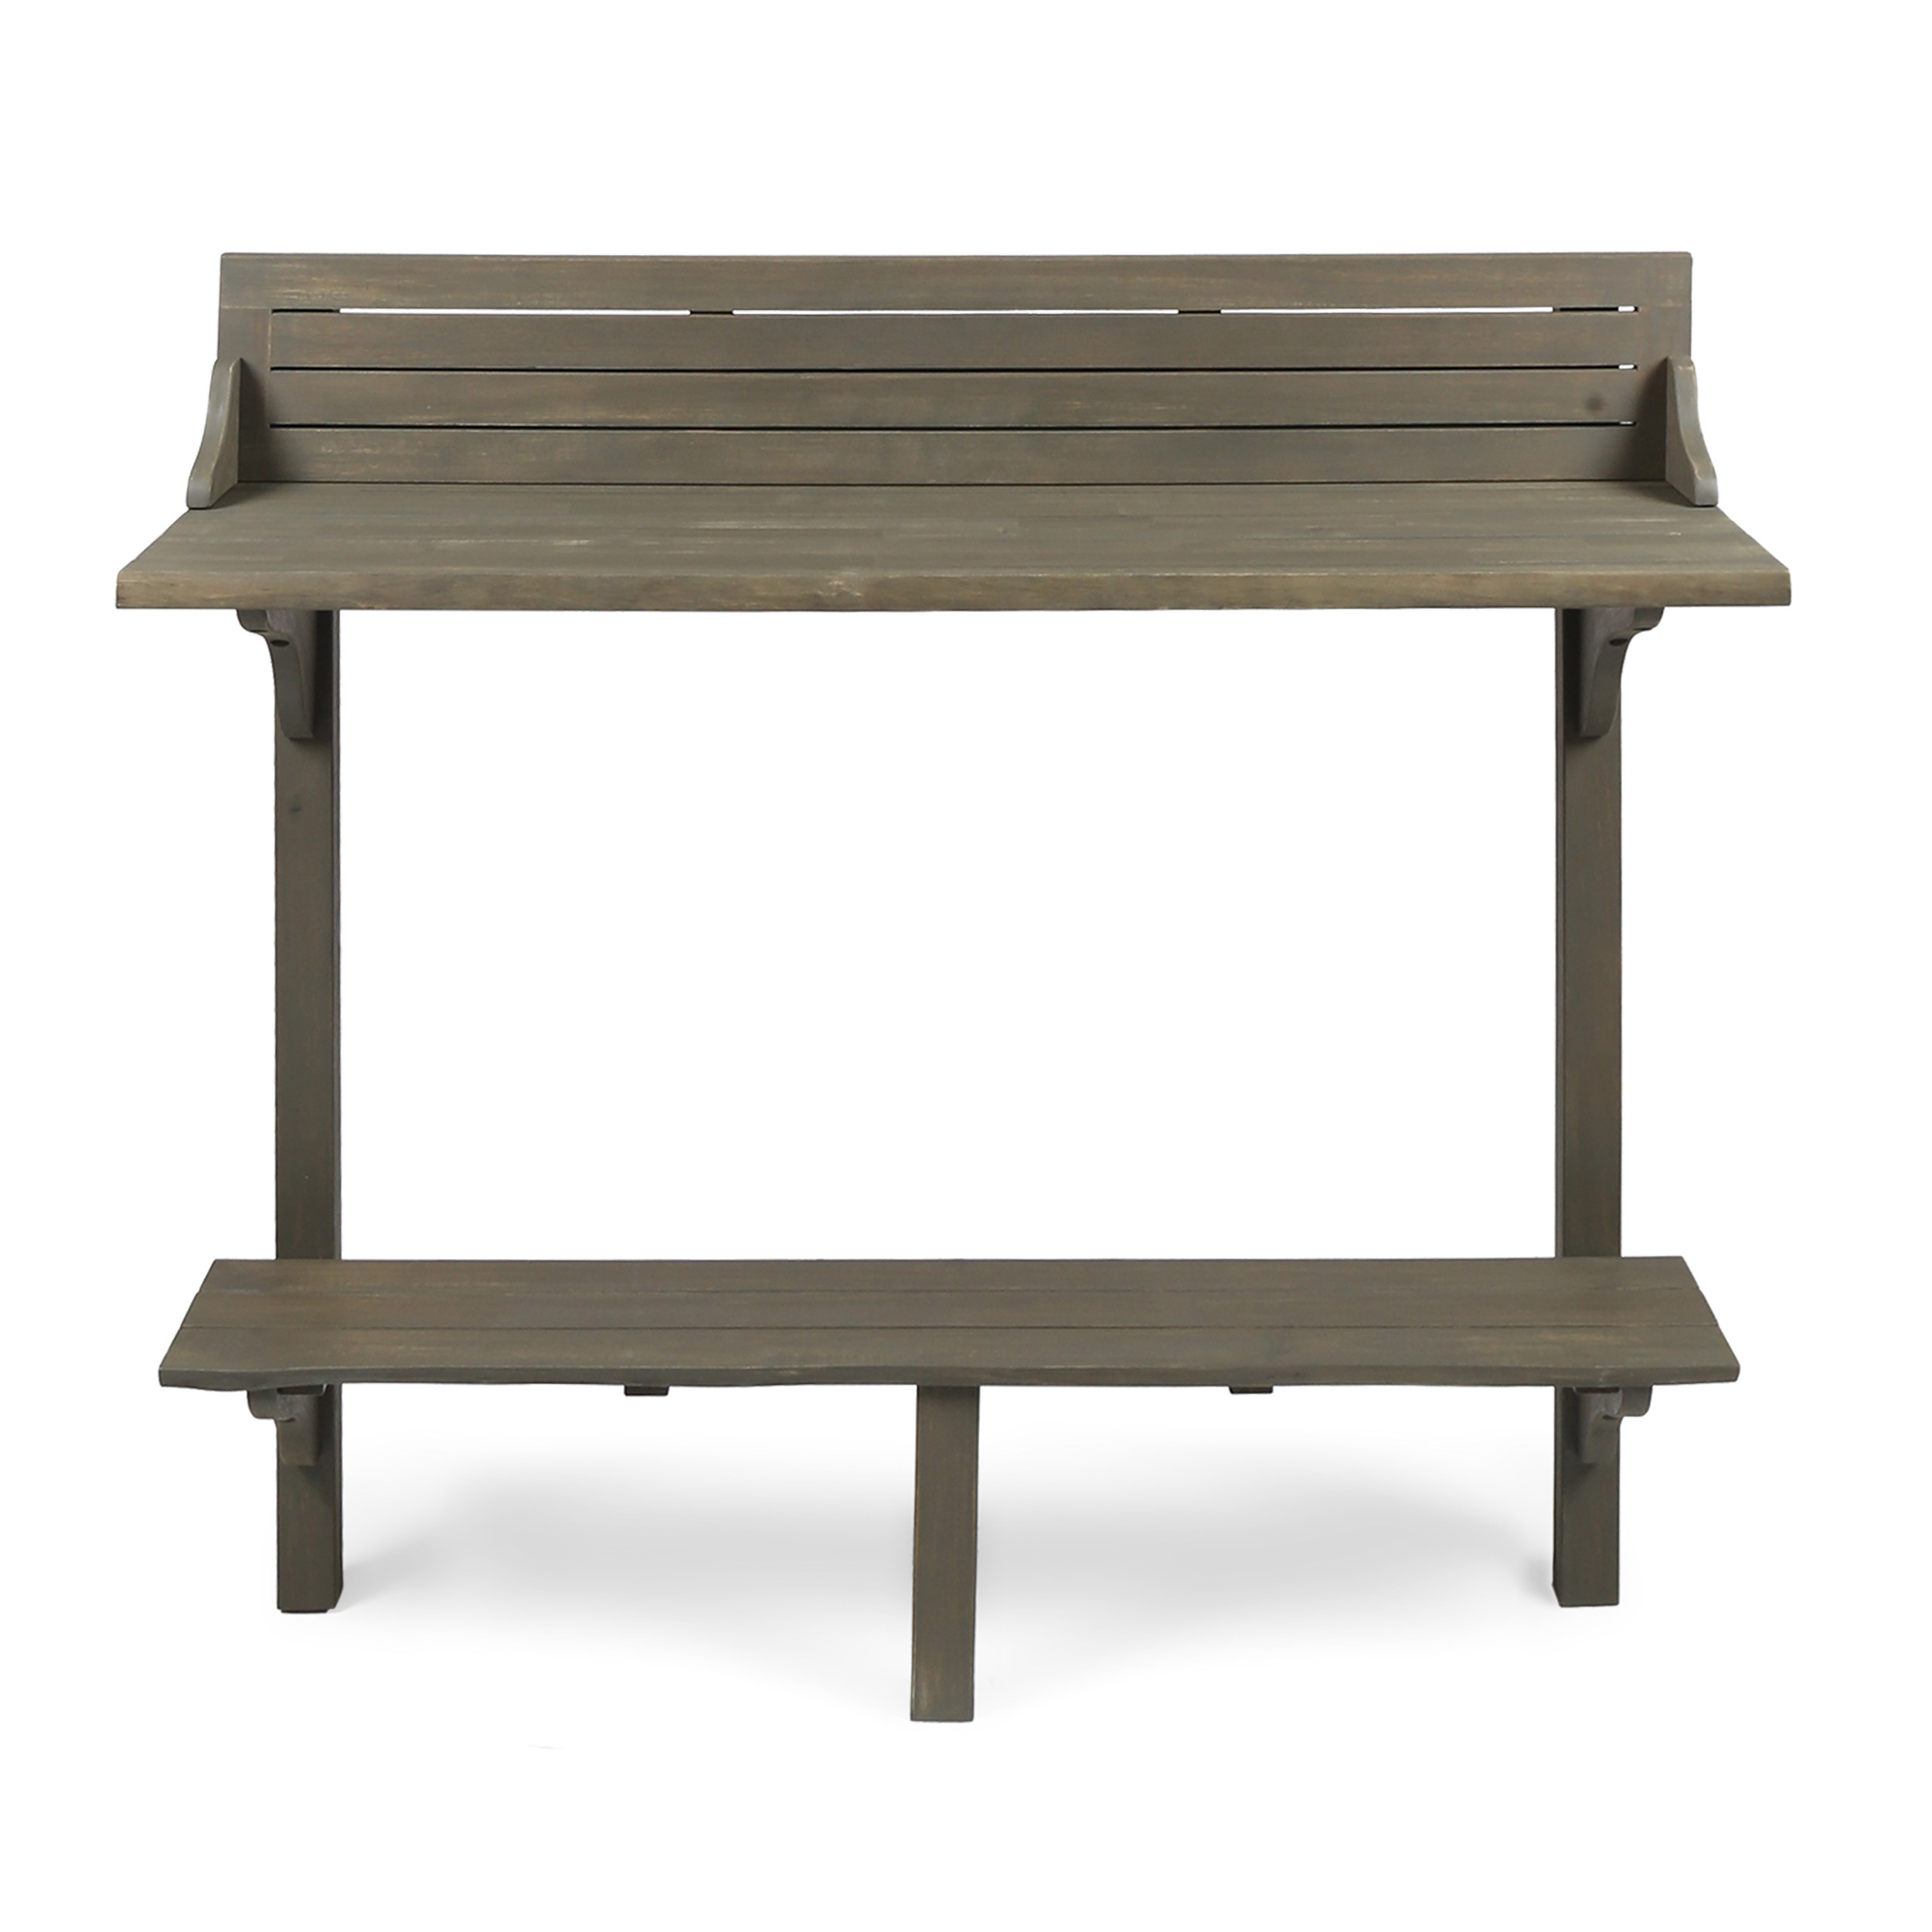 Cassie Outdoor Acacia Wood Balcony Bar Table - Natural Stained